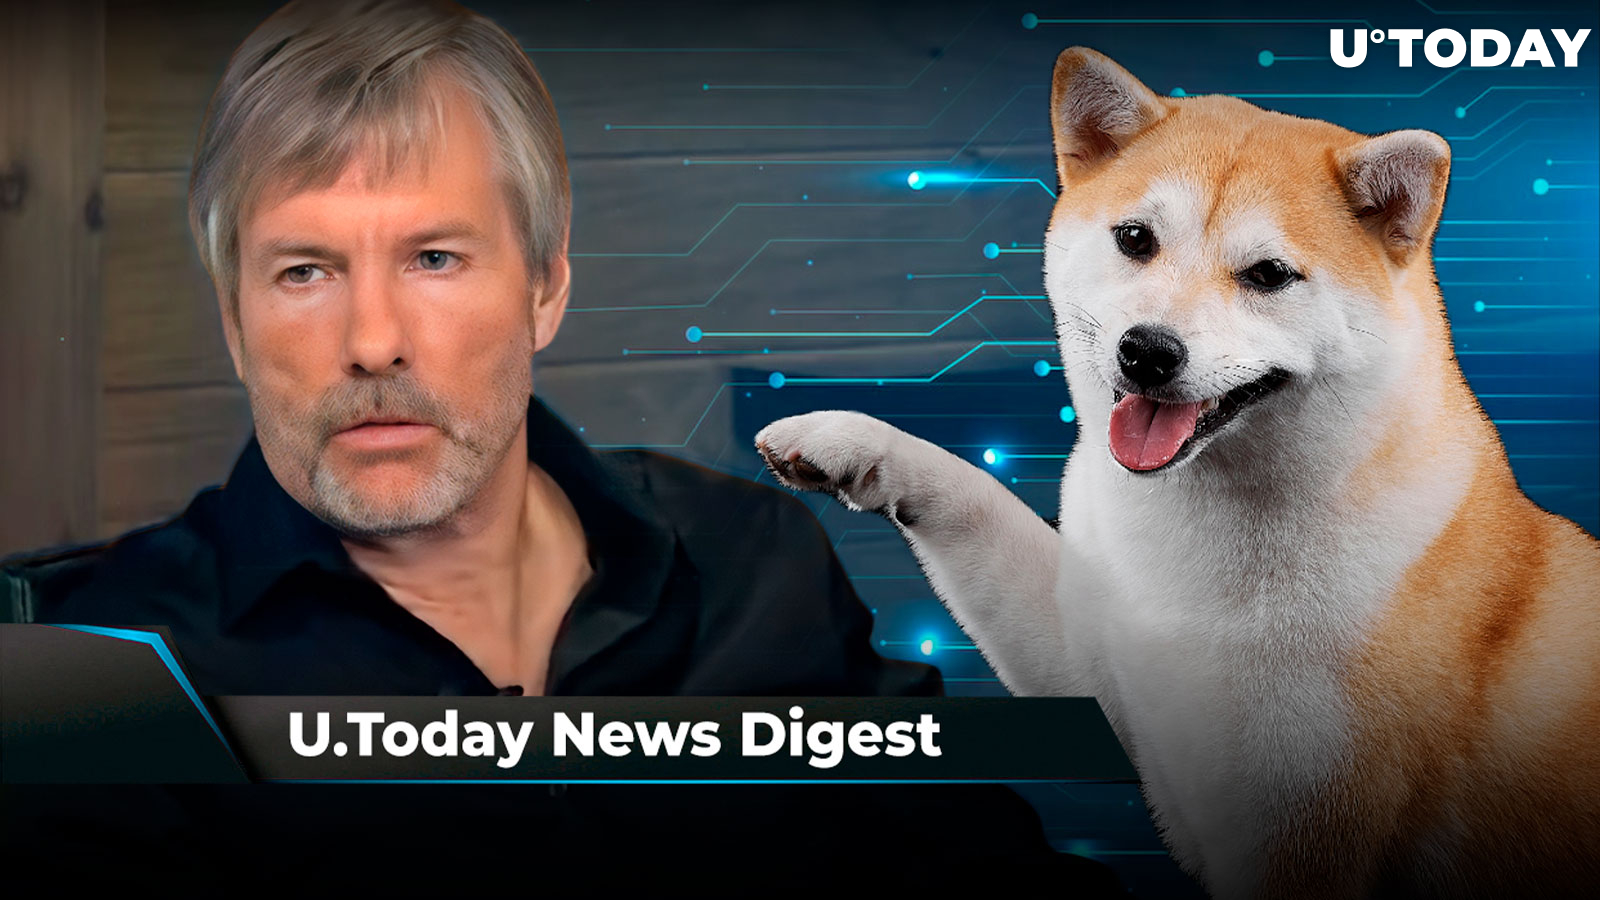 Michael Saylor Steps Down as MicroStrategy CEO, Bitstamp to Delist XRP Pair, SHIB Team Reveals Name of Much-Awaited Game: Crypto News Digest by U.Today